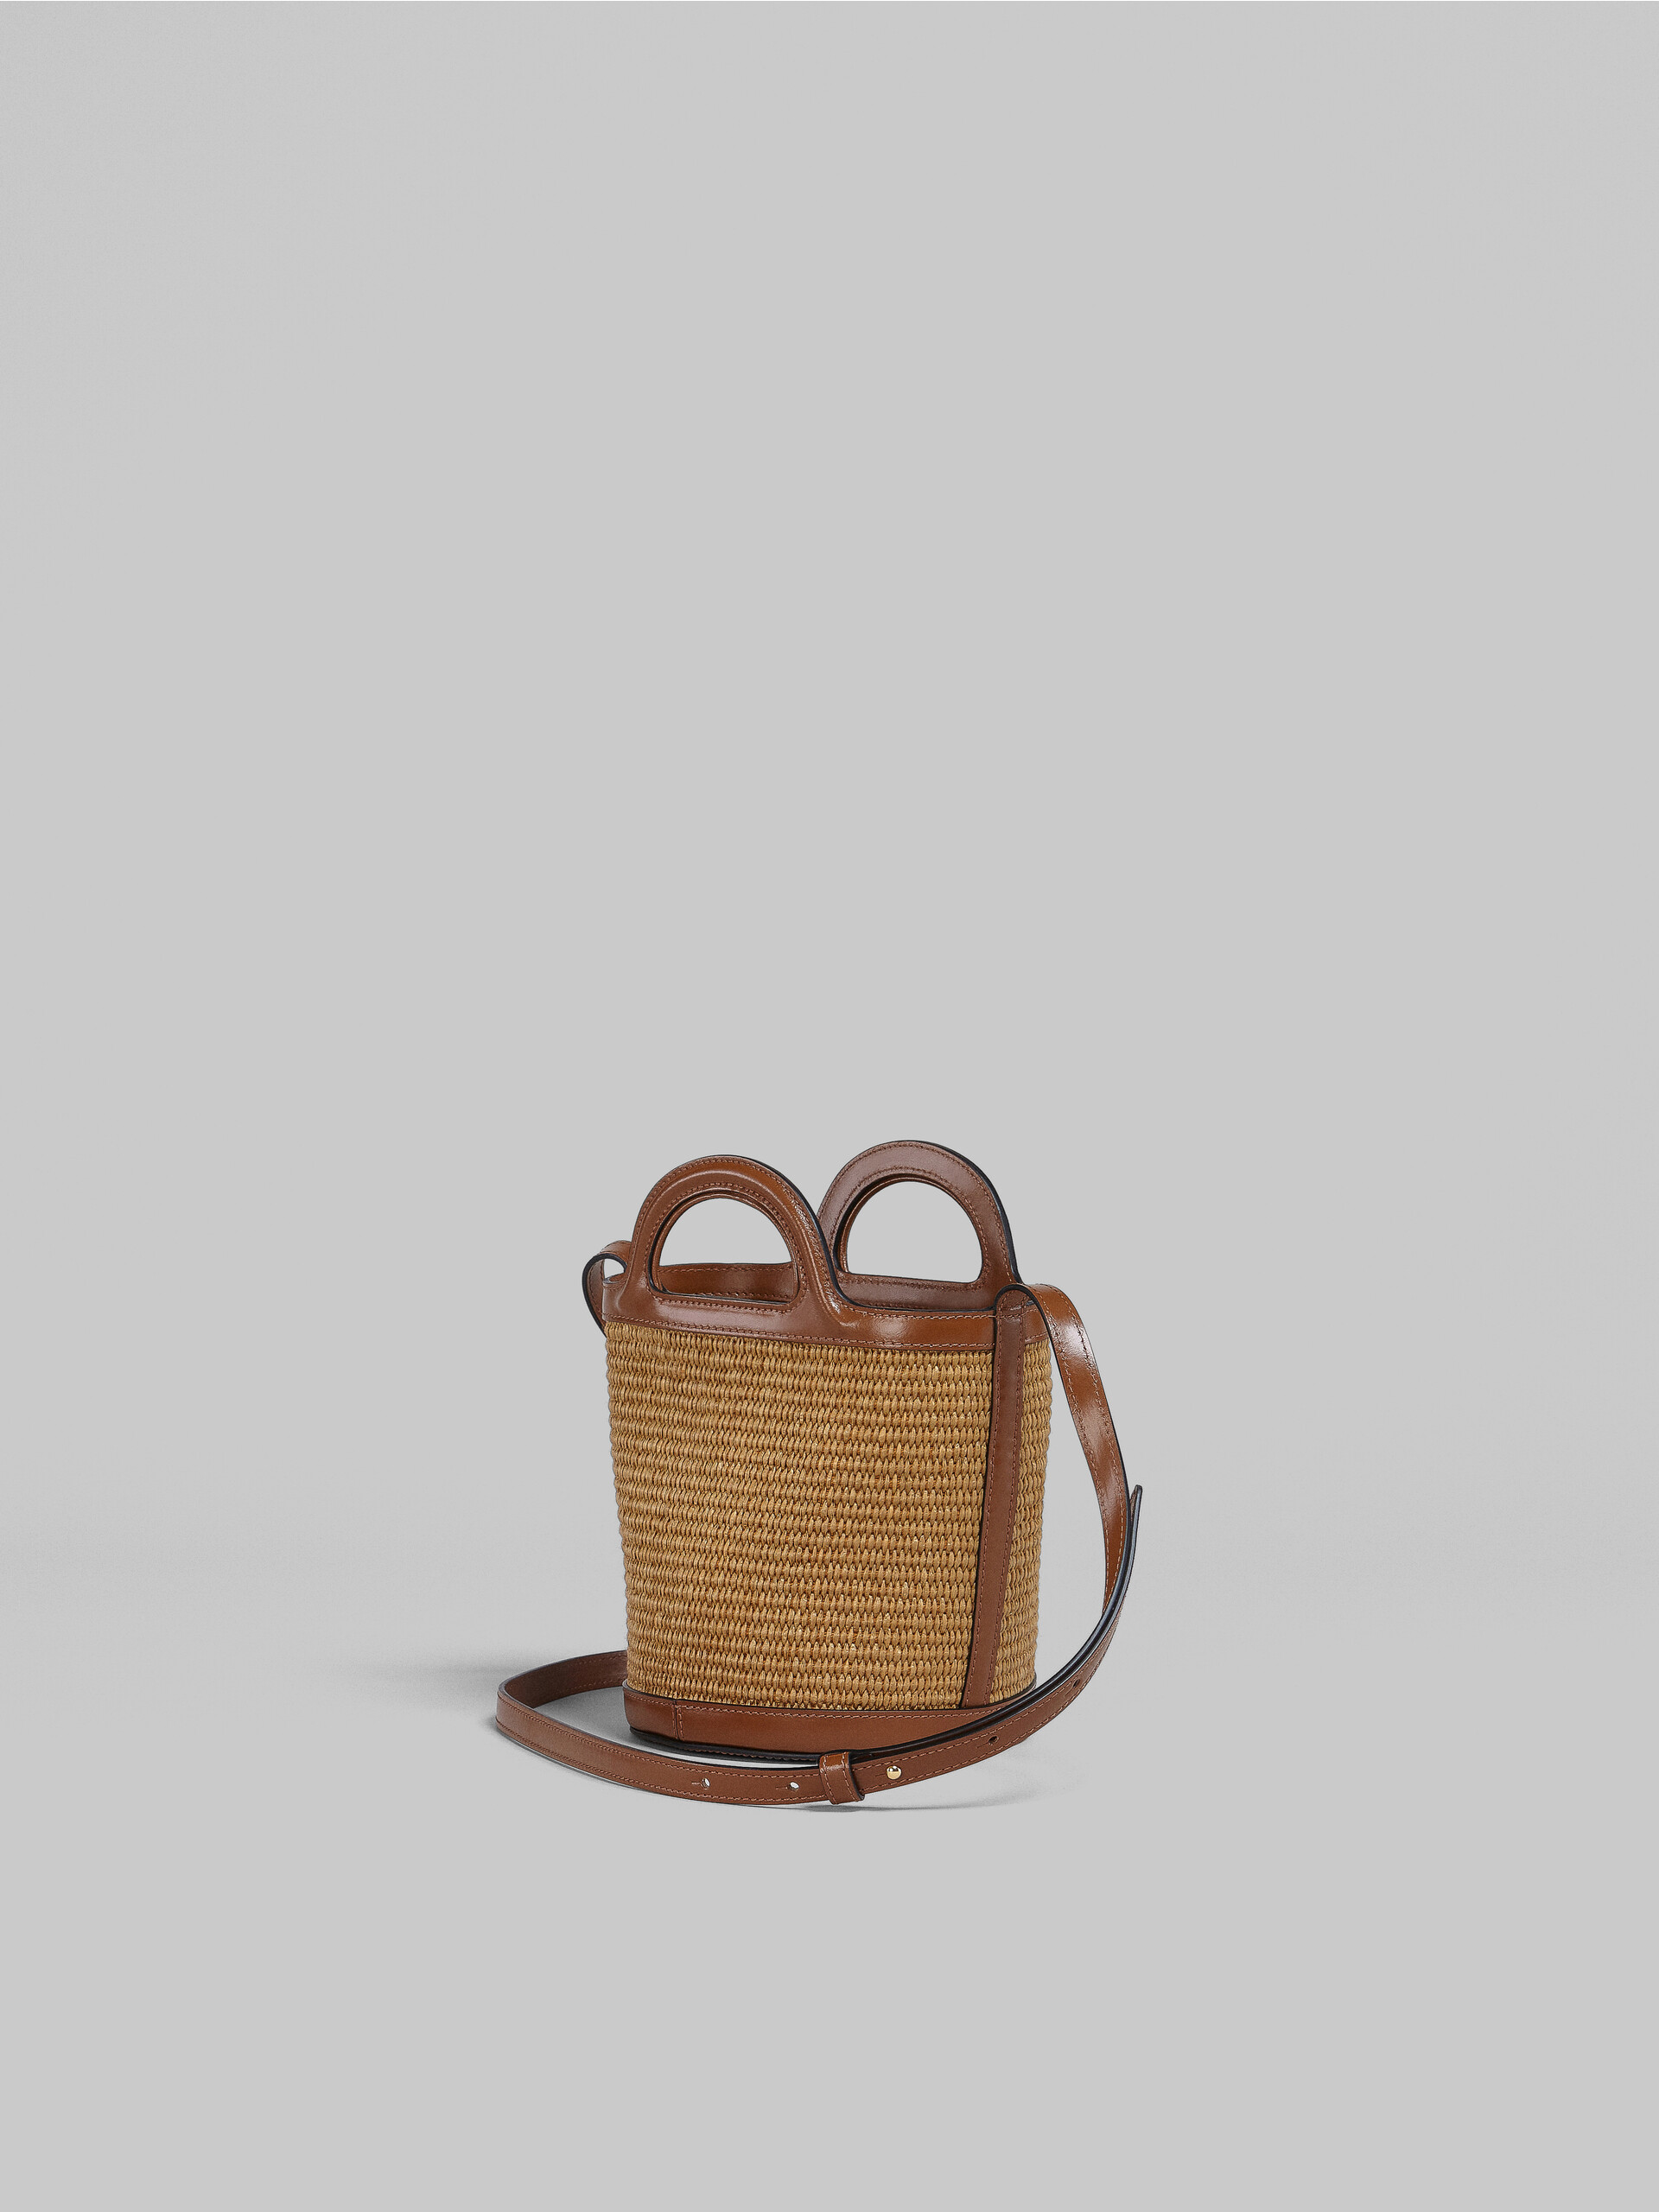 Tropicalia Small Bucket Bag in brown leather and raffia